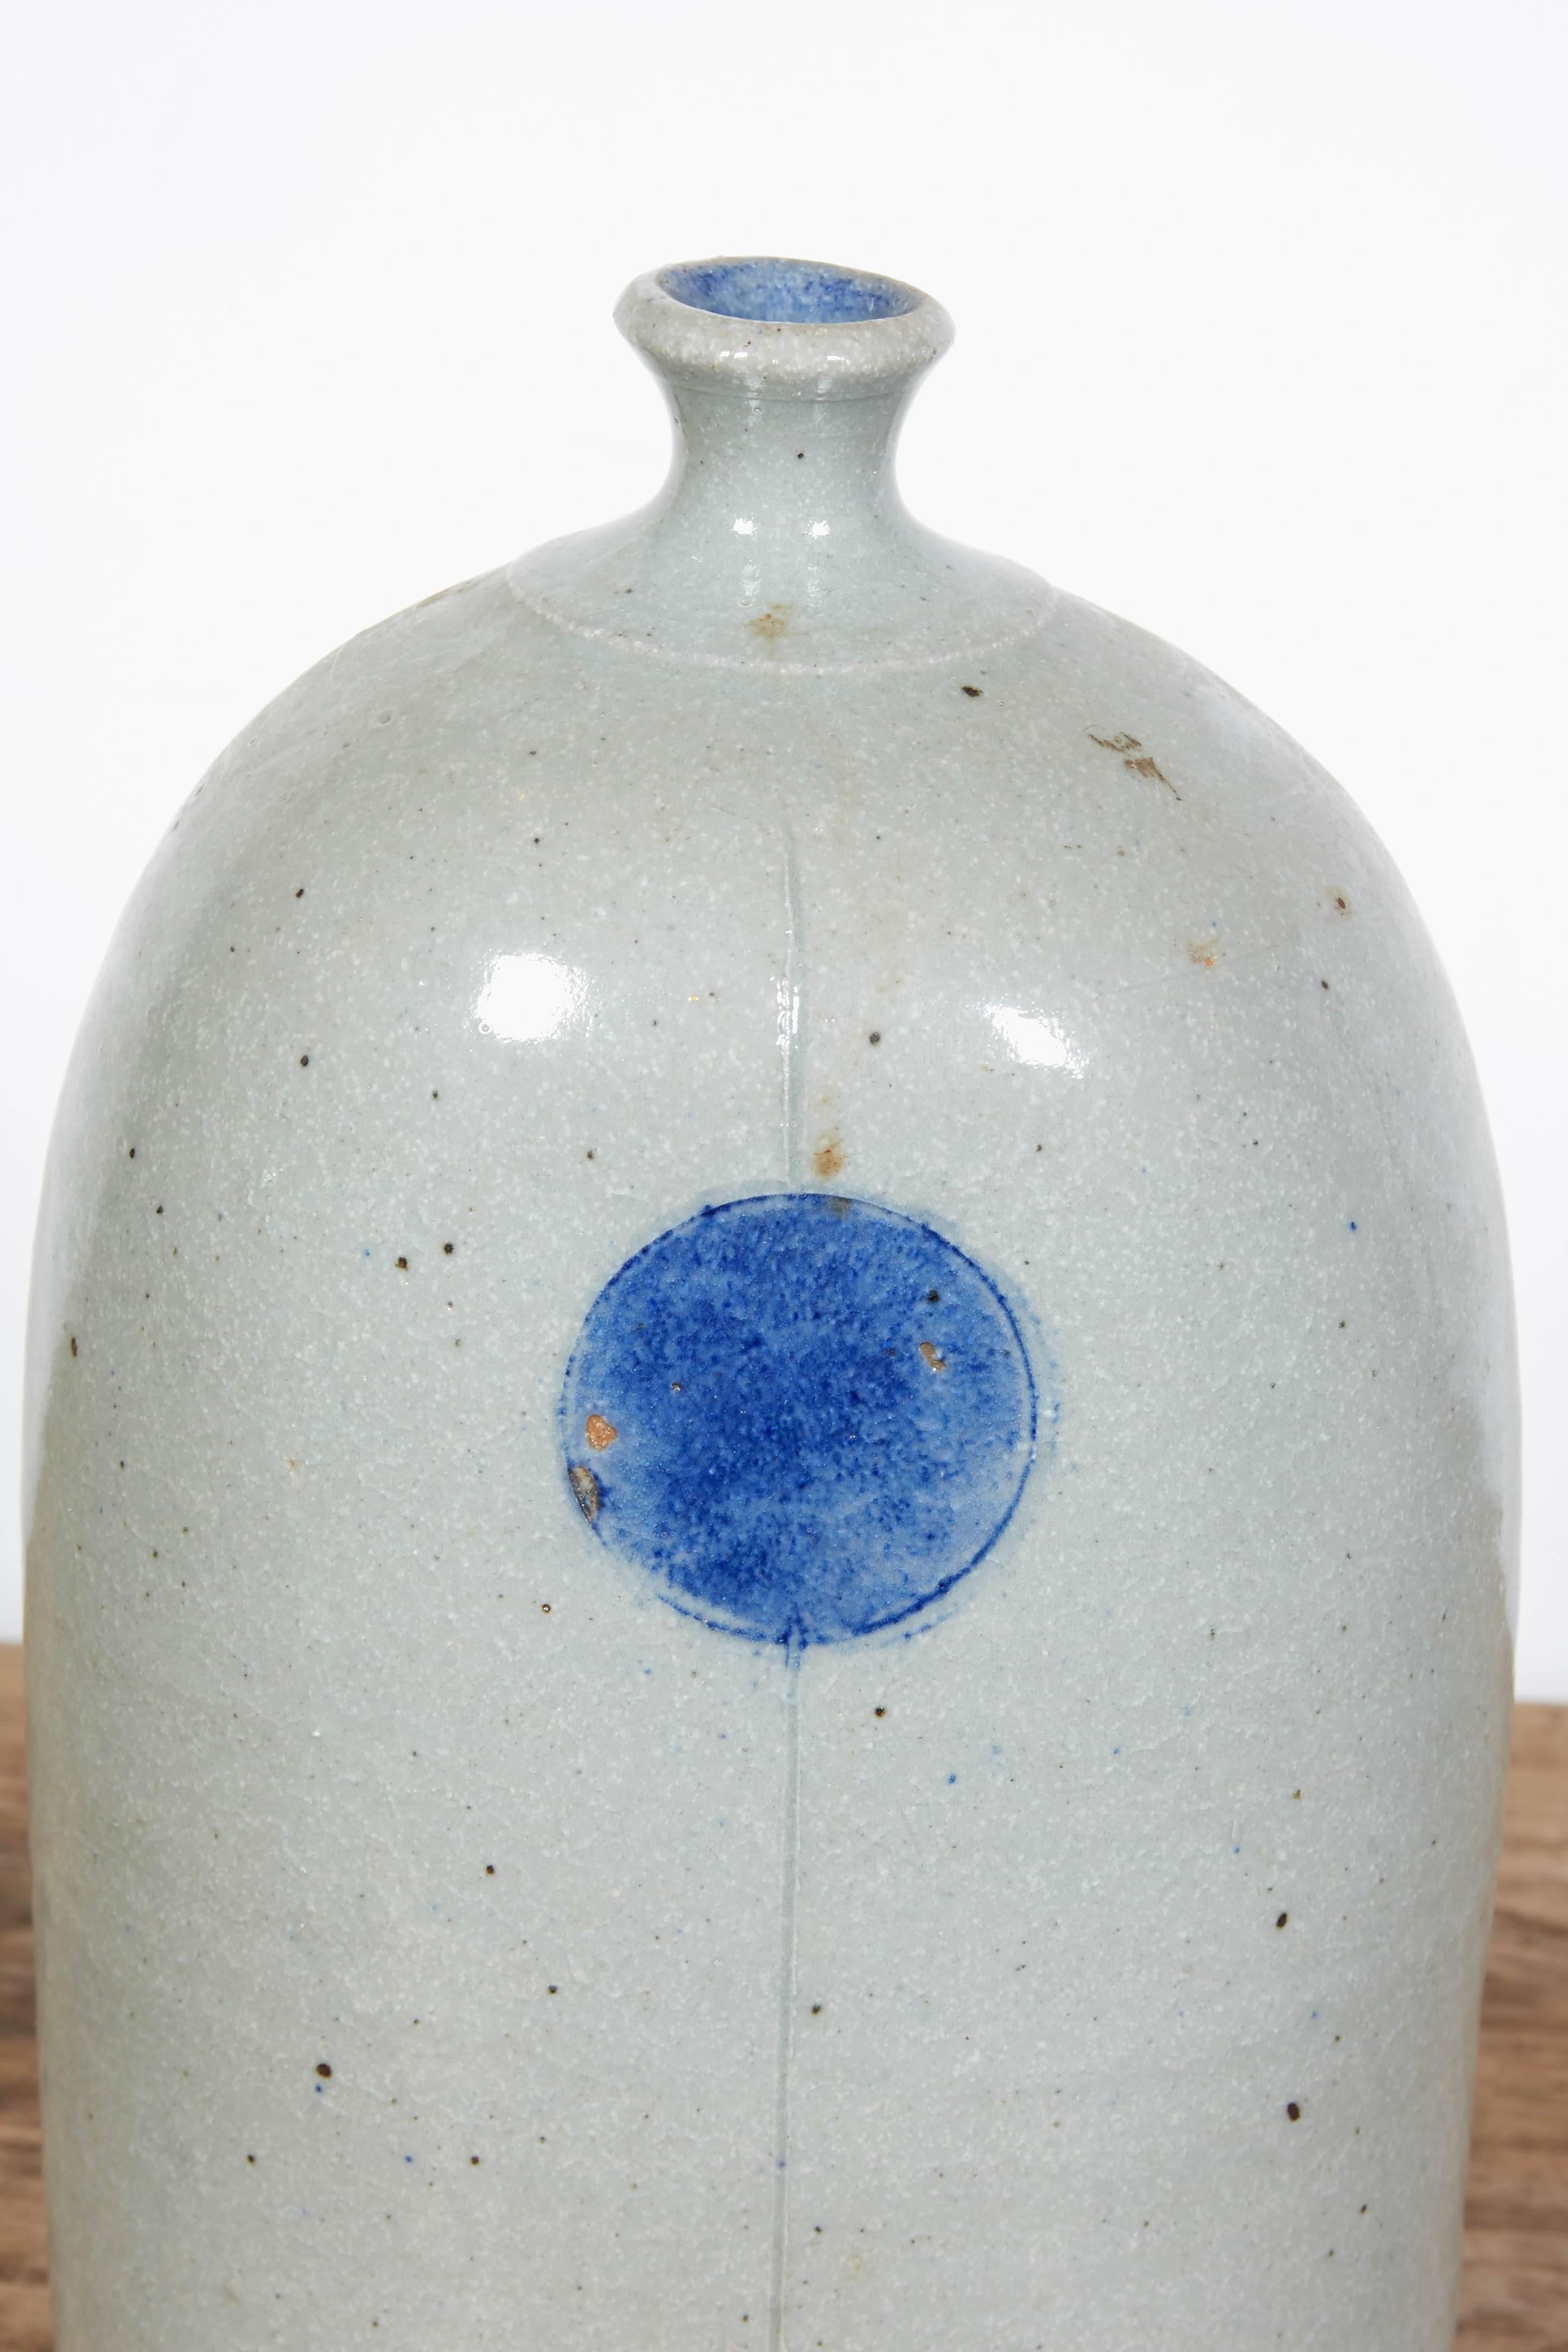 A simple and striking handmade and hand glazed ceramic vase with minimalist shape and warm colors.